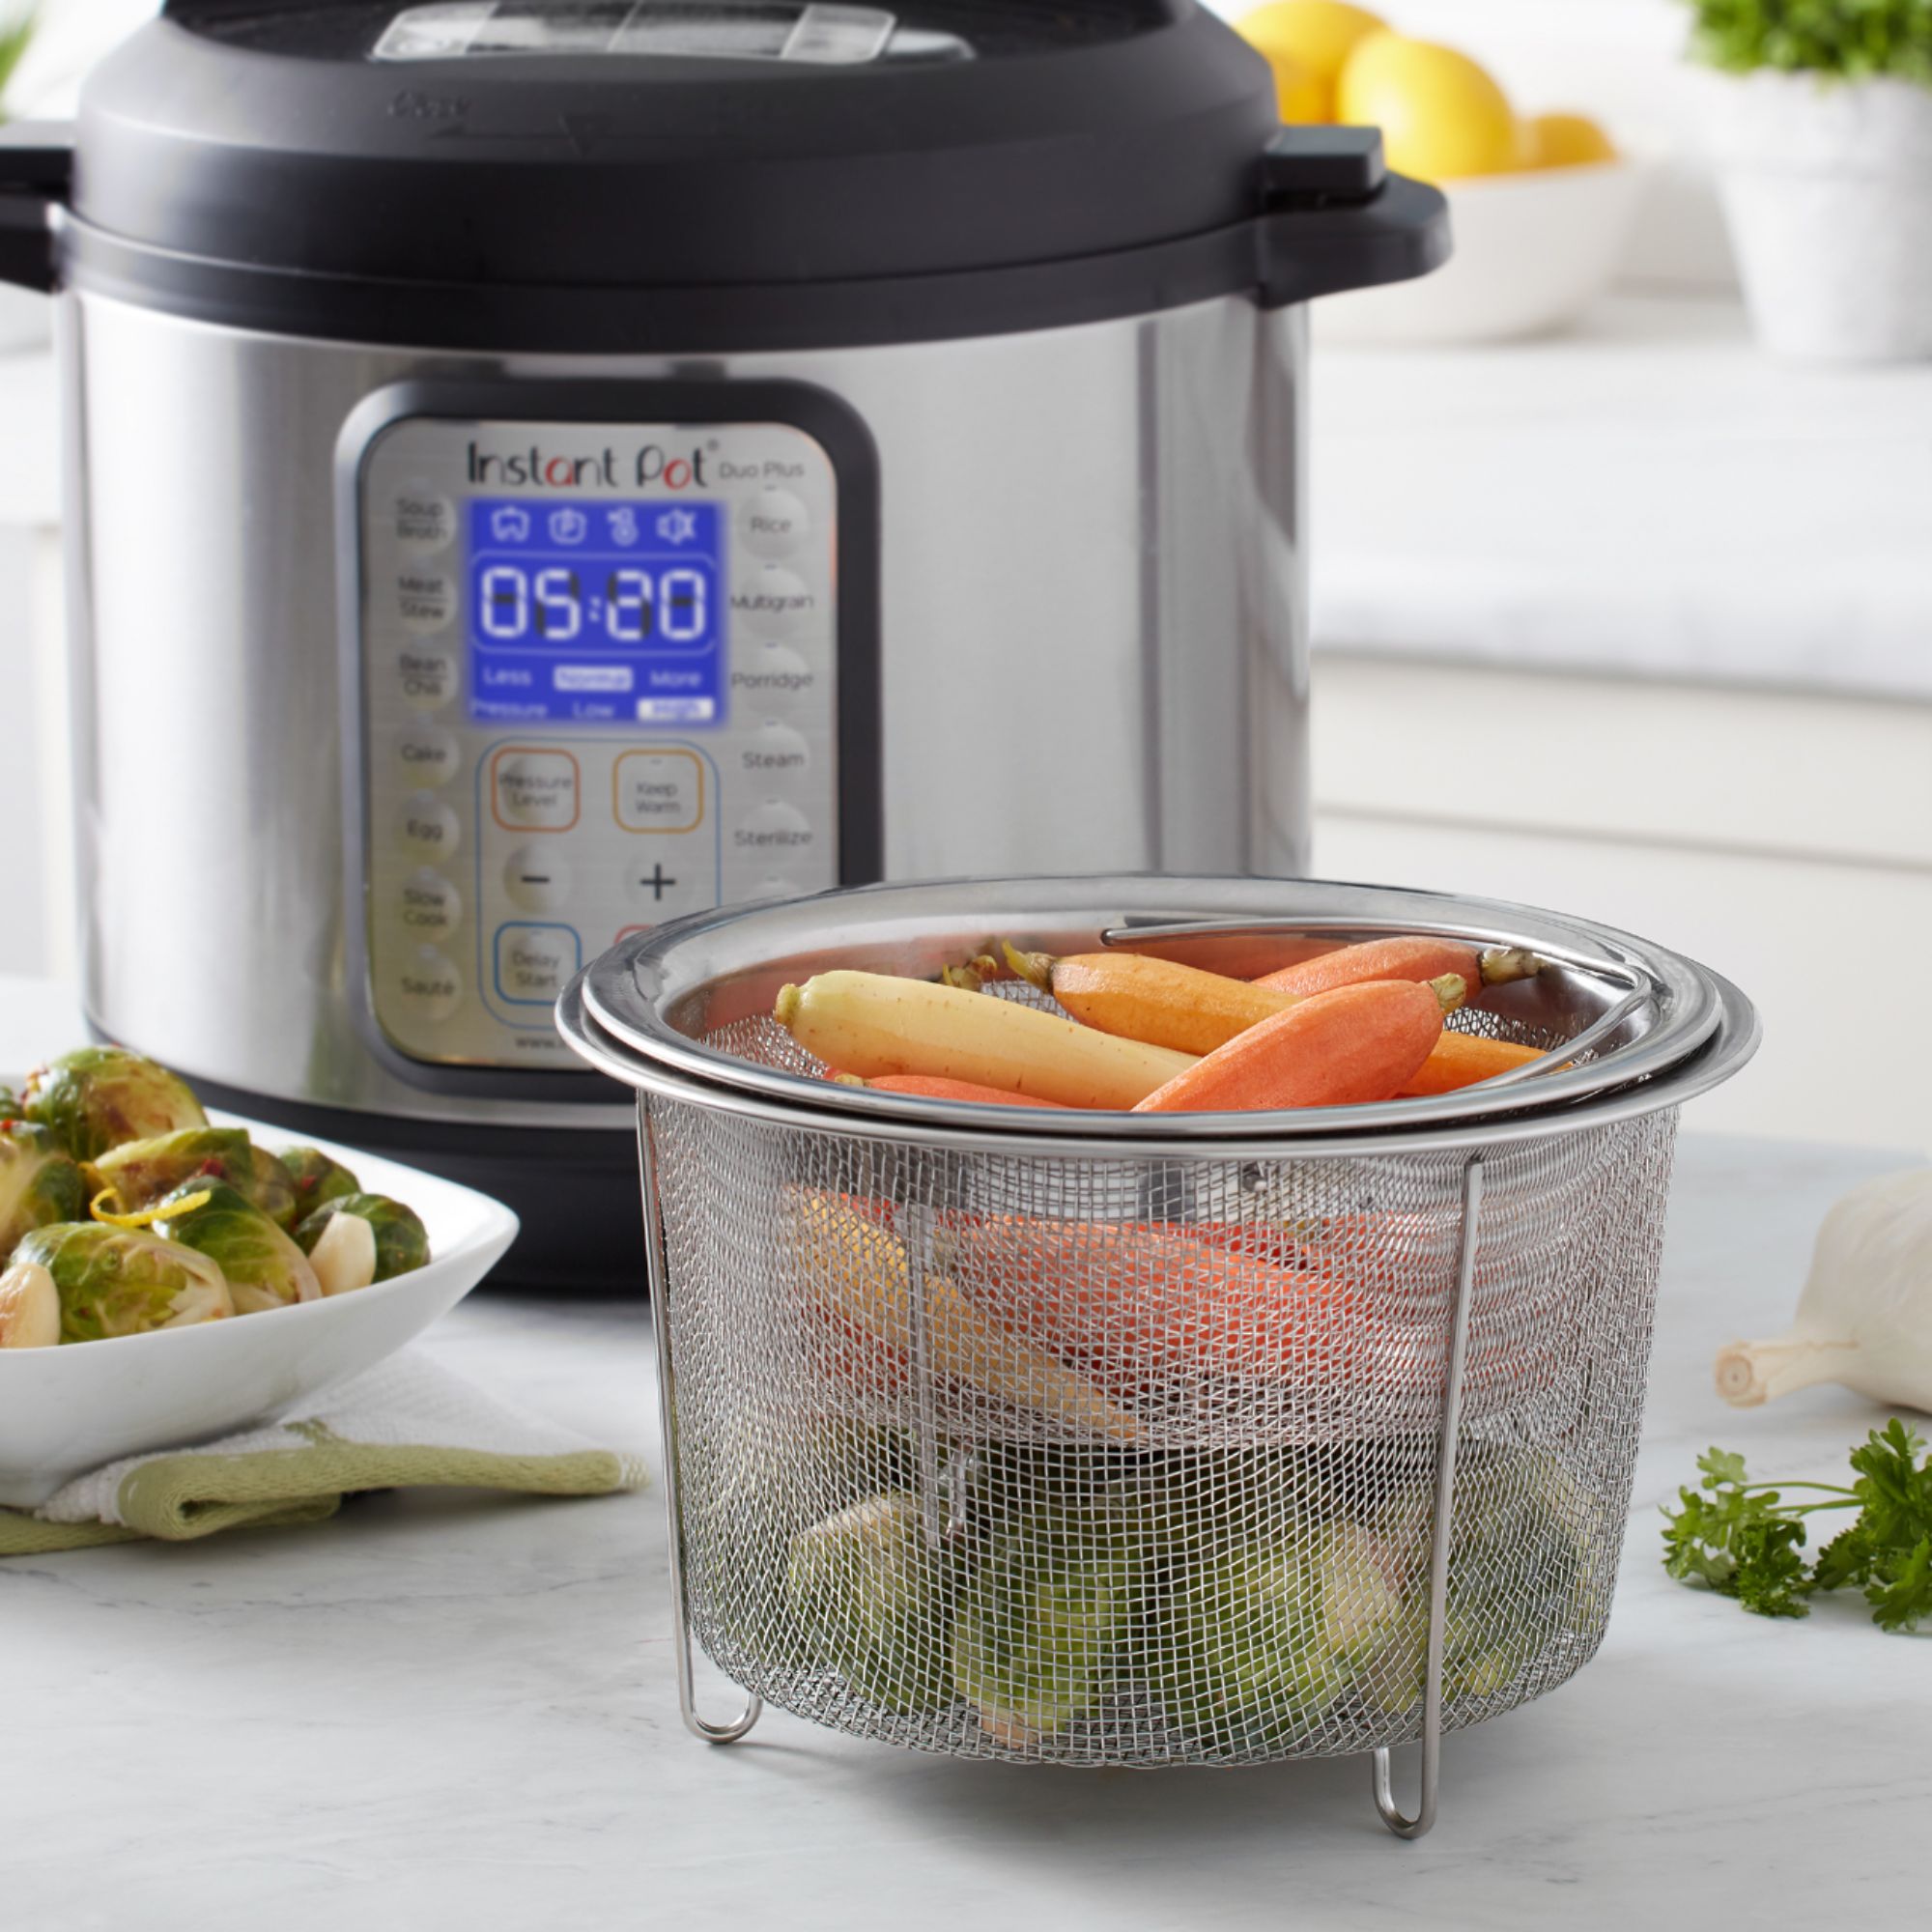 Best Instant Pot Steamer Basket Guide - How to Choose and Use One